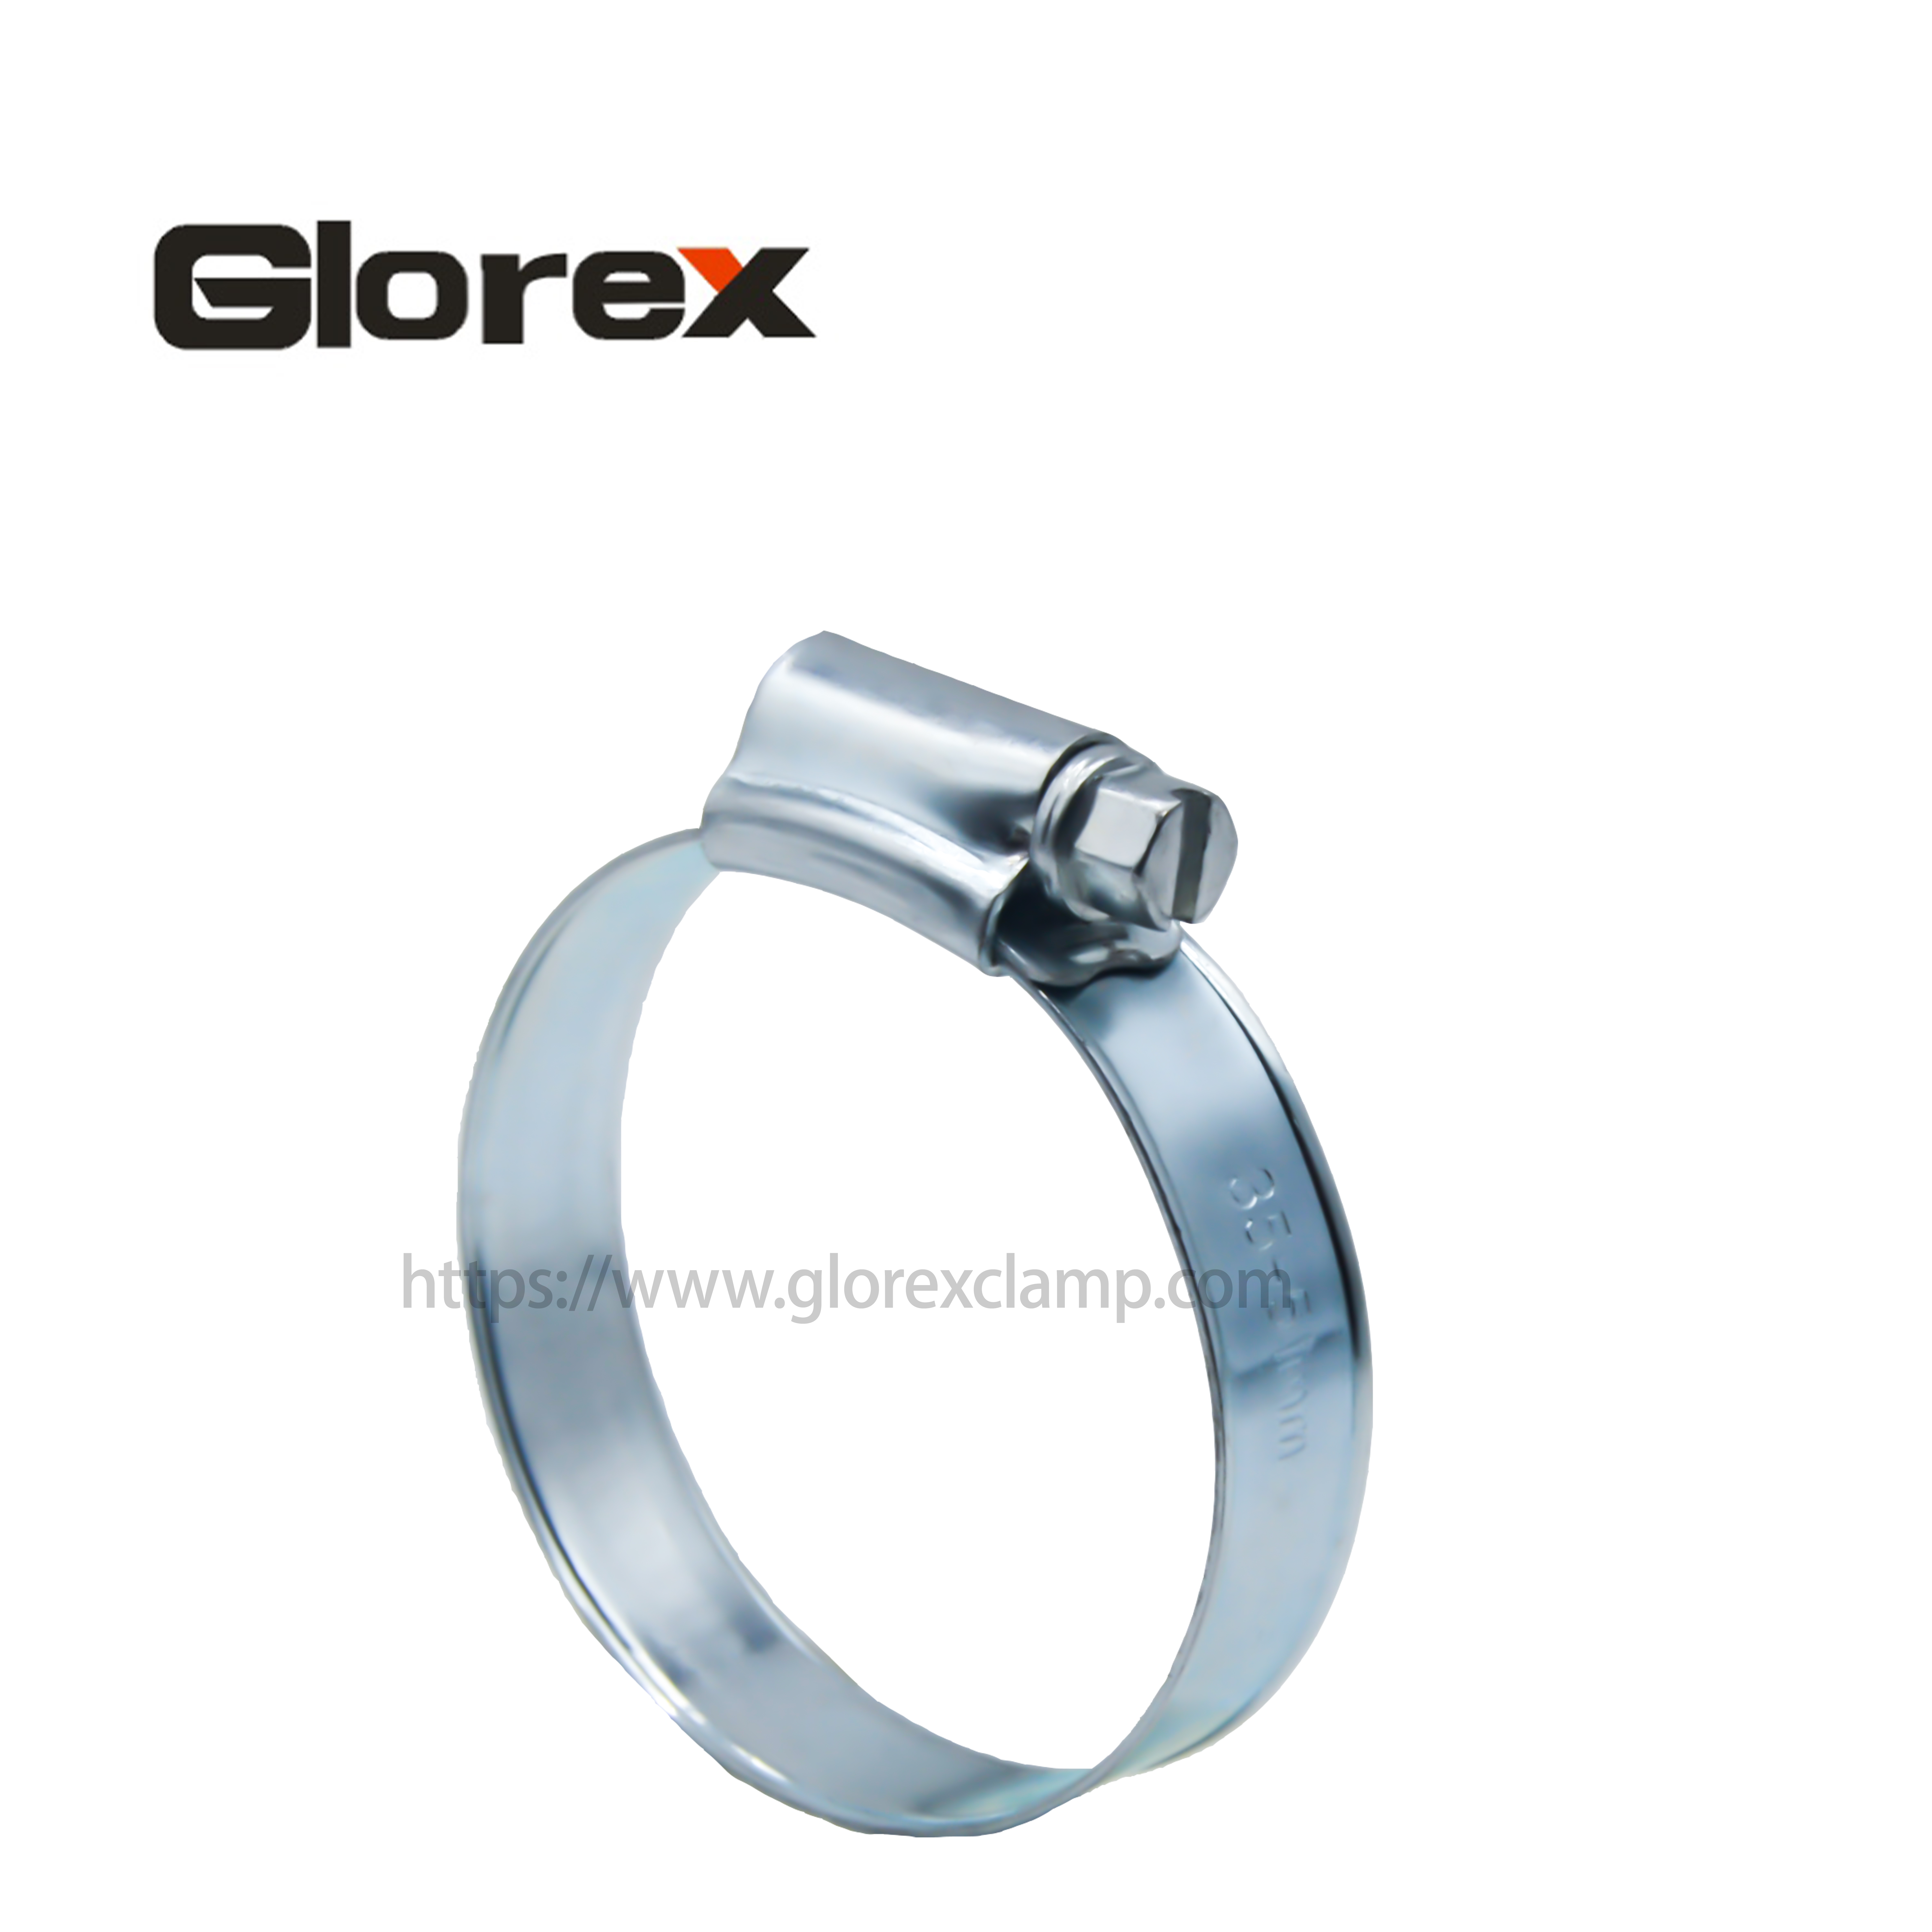 China Factory for Masterpro Hose Clamps - British type hose clamp with welding – Glorex